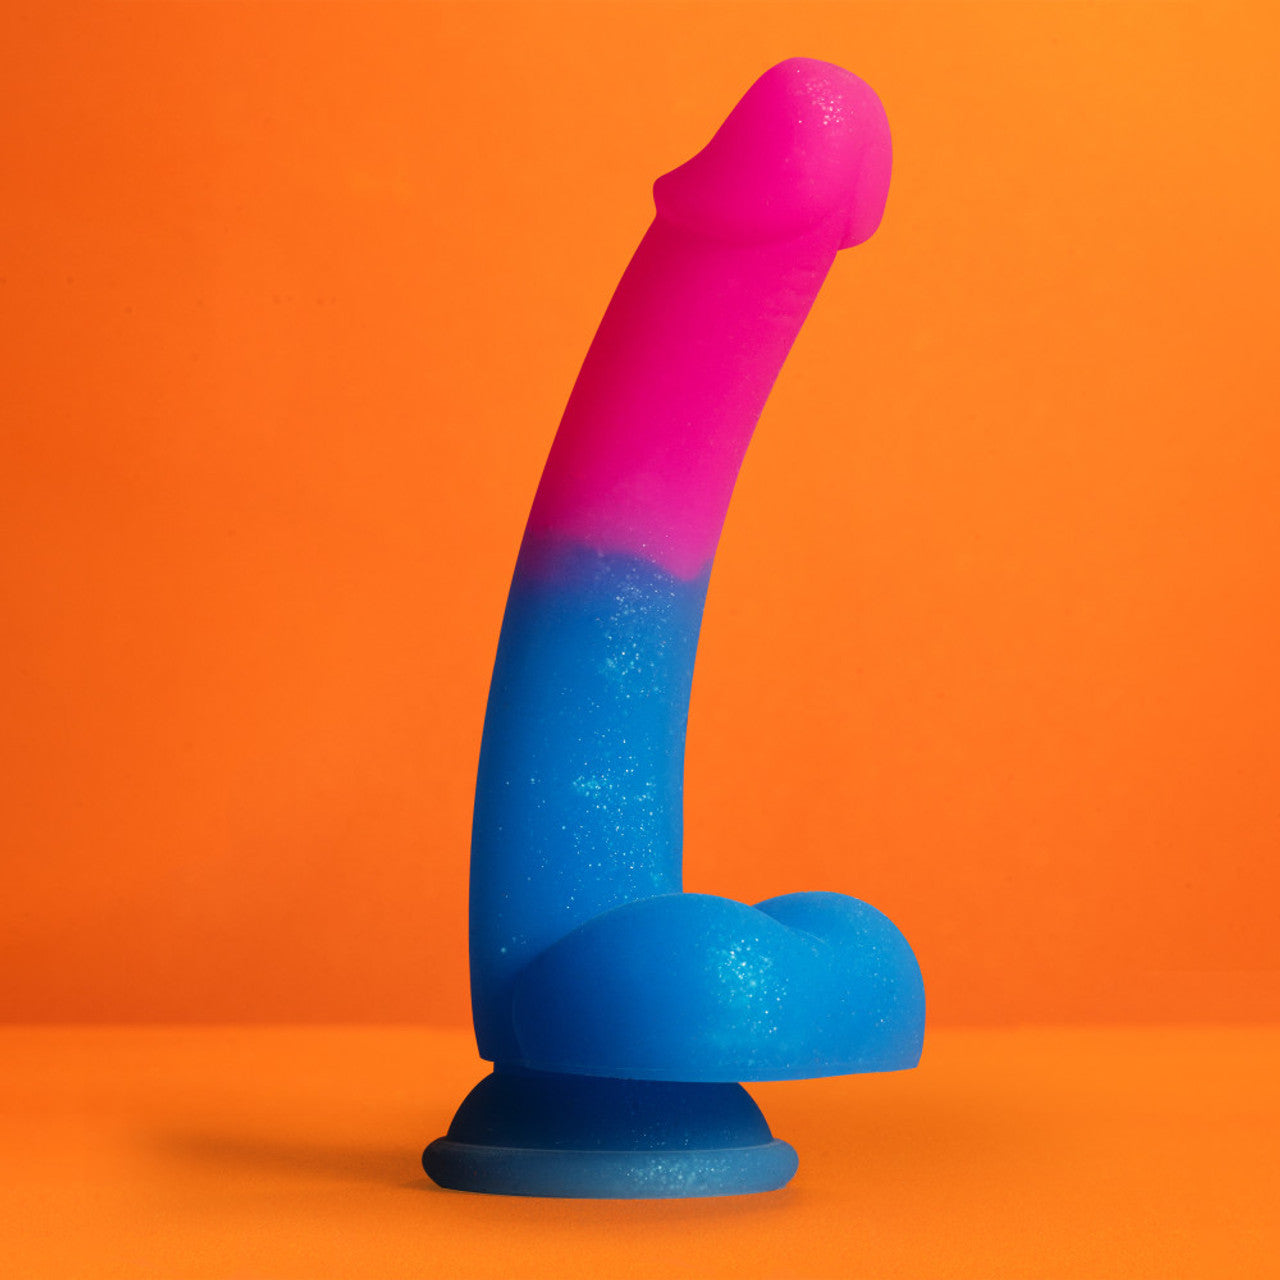 Avant Chasing Sunsets Cured Silicone Dildo - Mermaid - Thorn & Feather